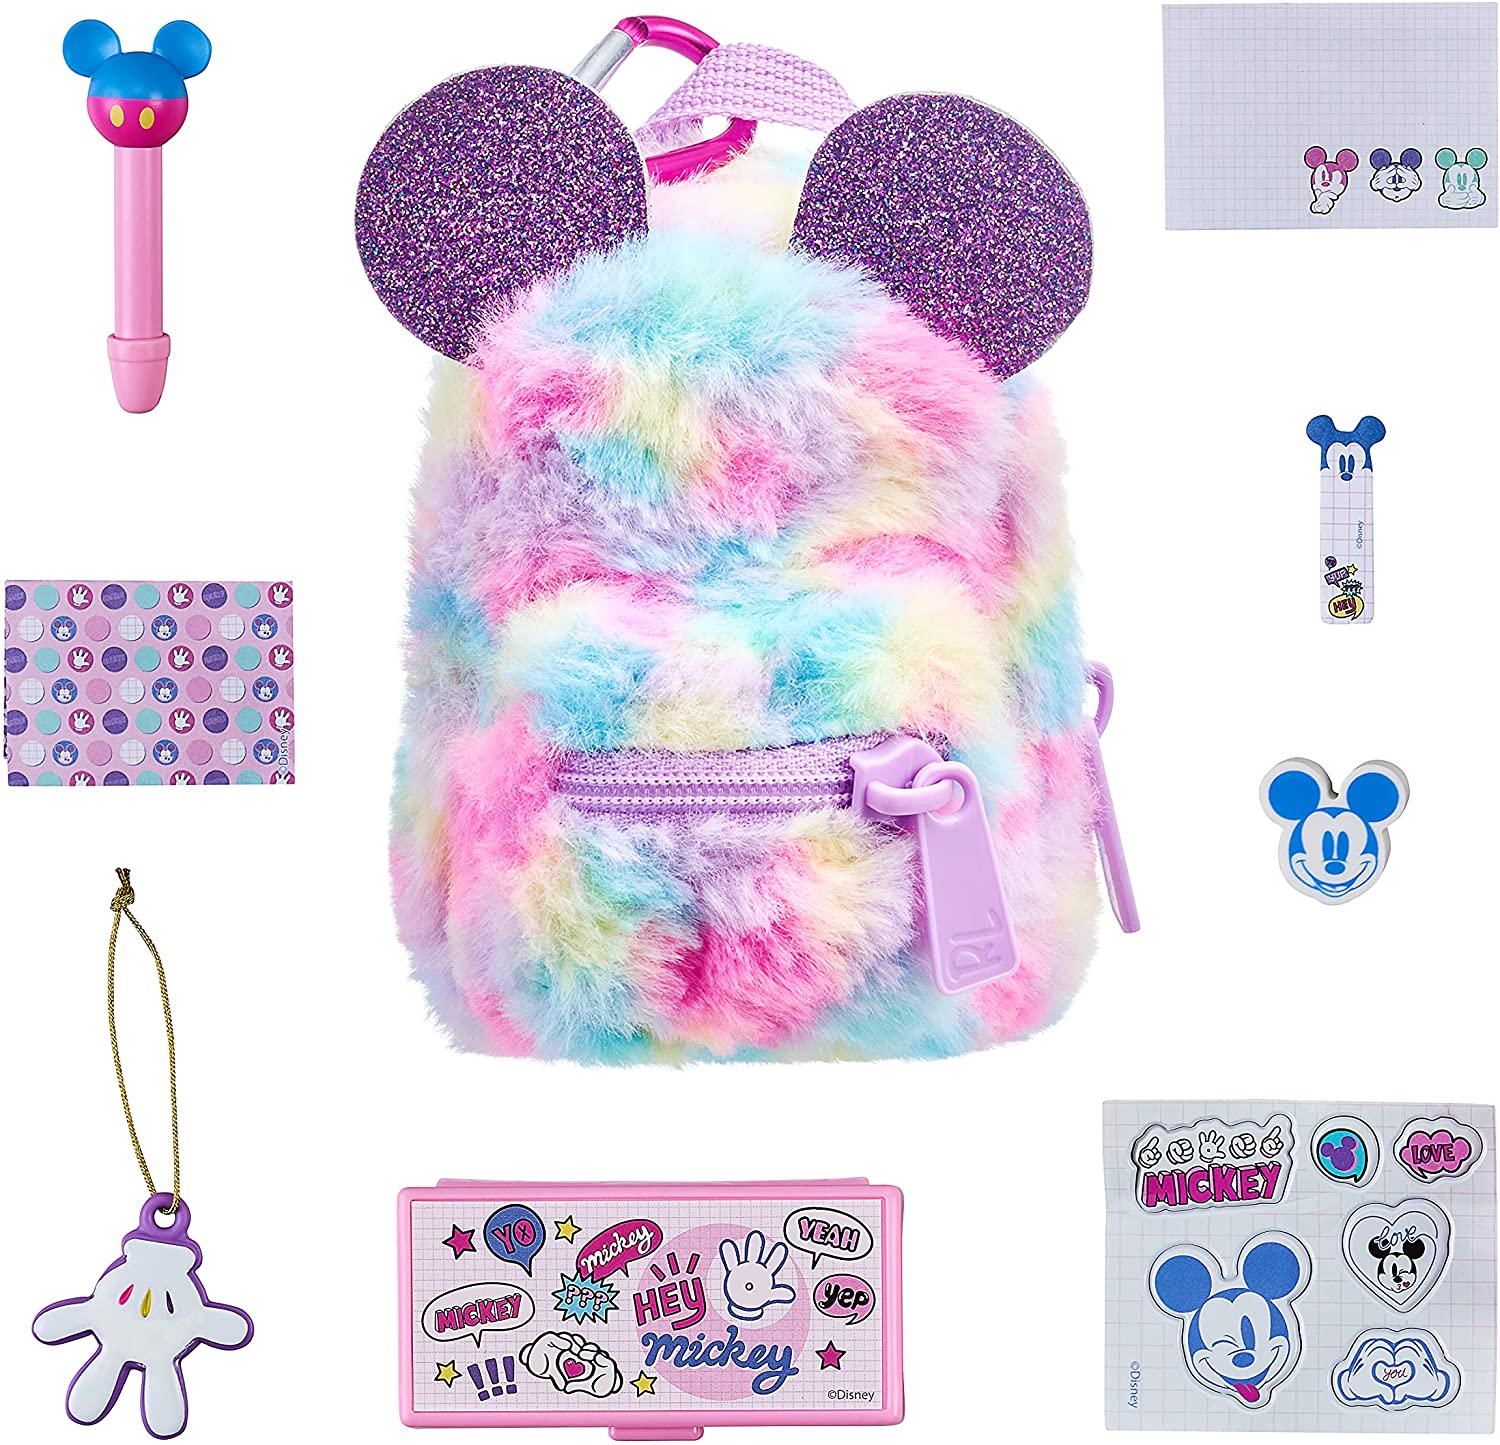 Real Littles Collectible Micro Disney Backpacks with 6 Surprises Inside 